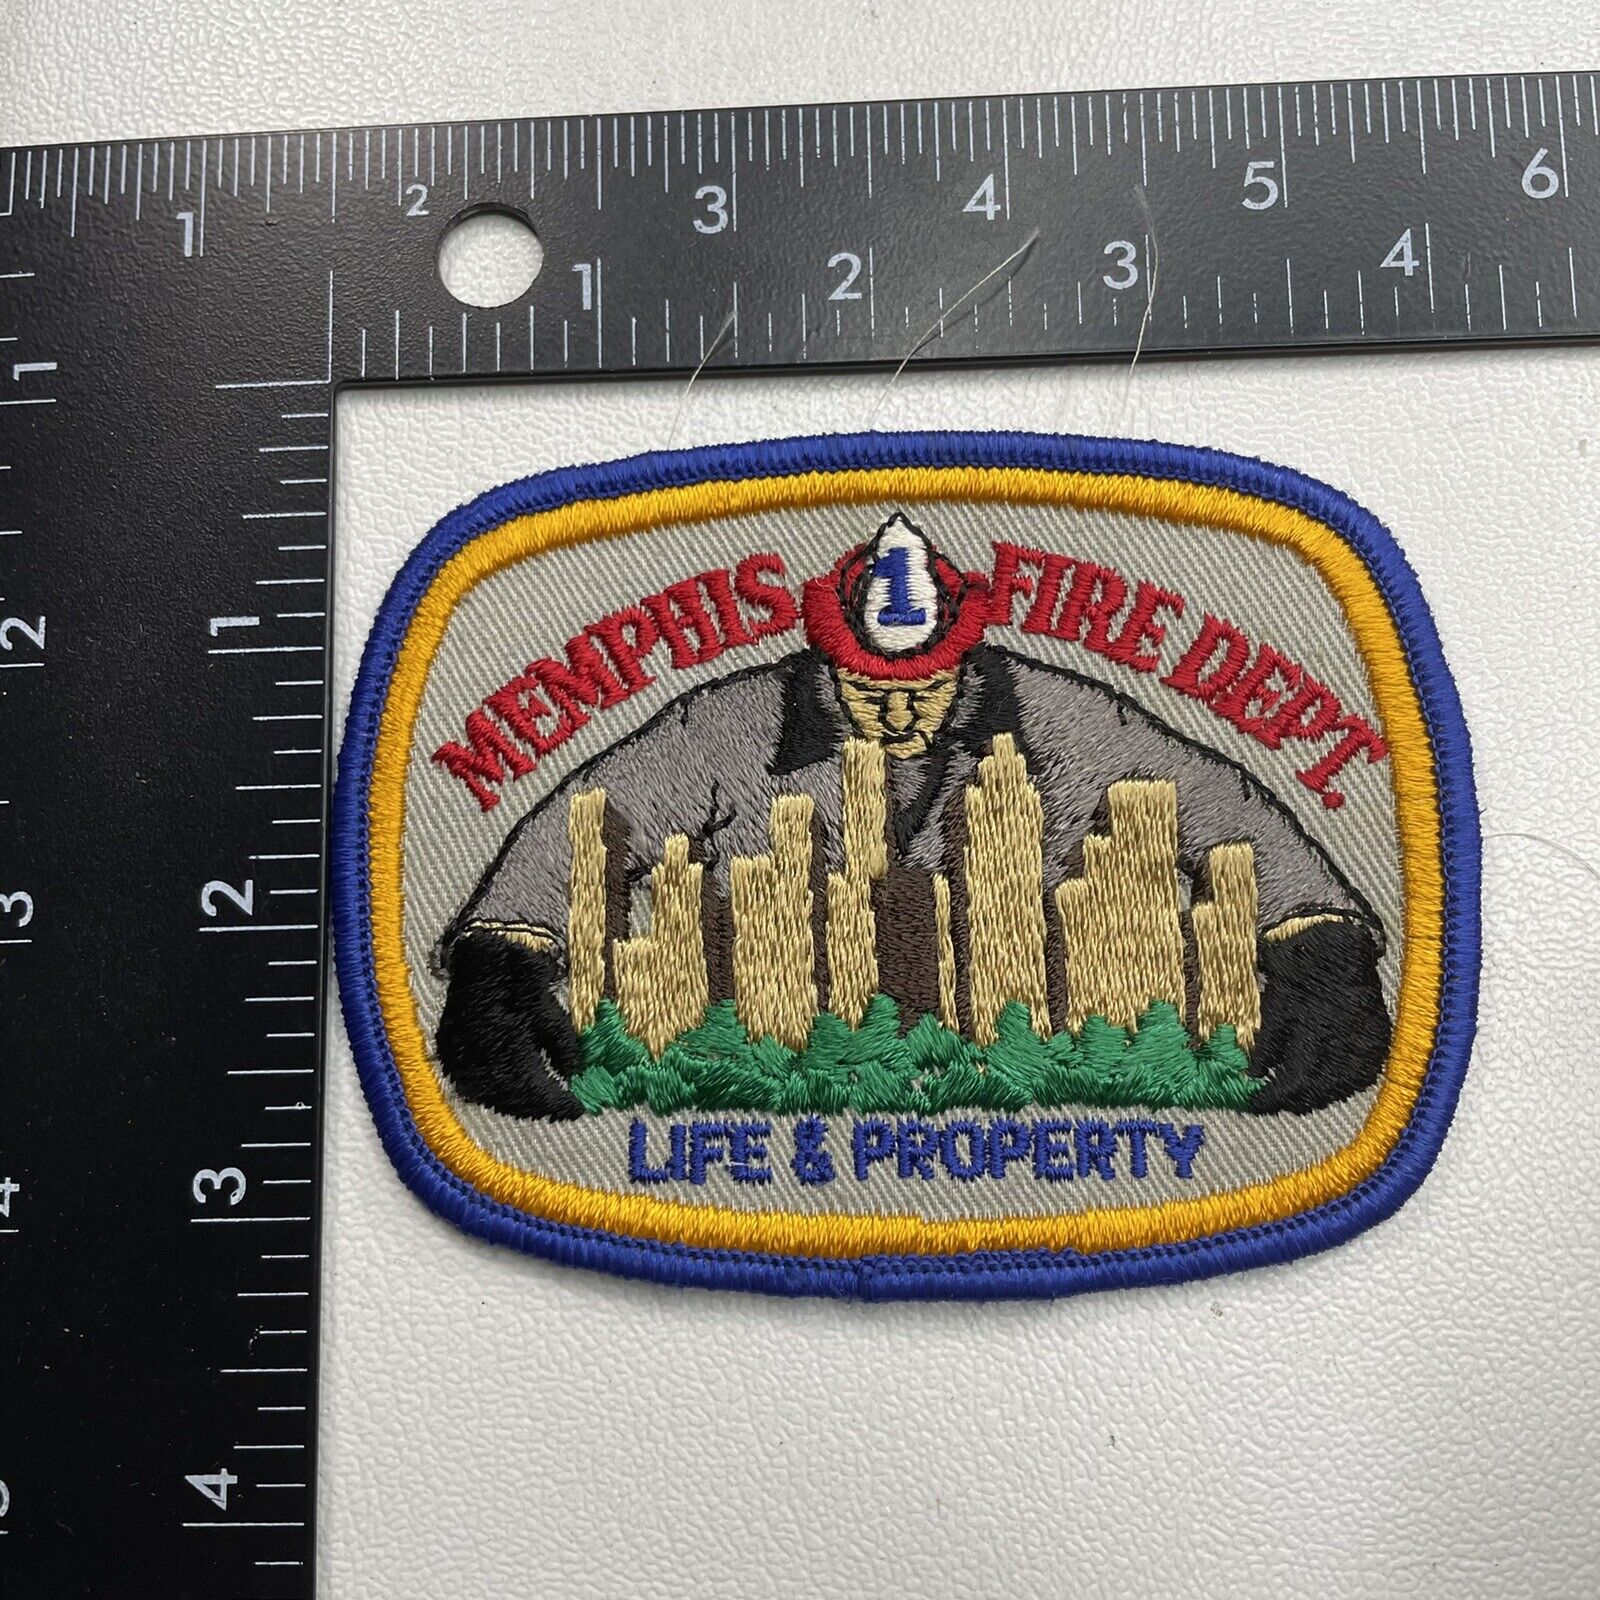 Tennessee MEMPHIS Fire Department Life & Property Patch C29C